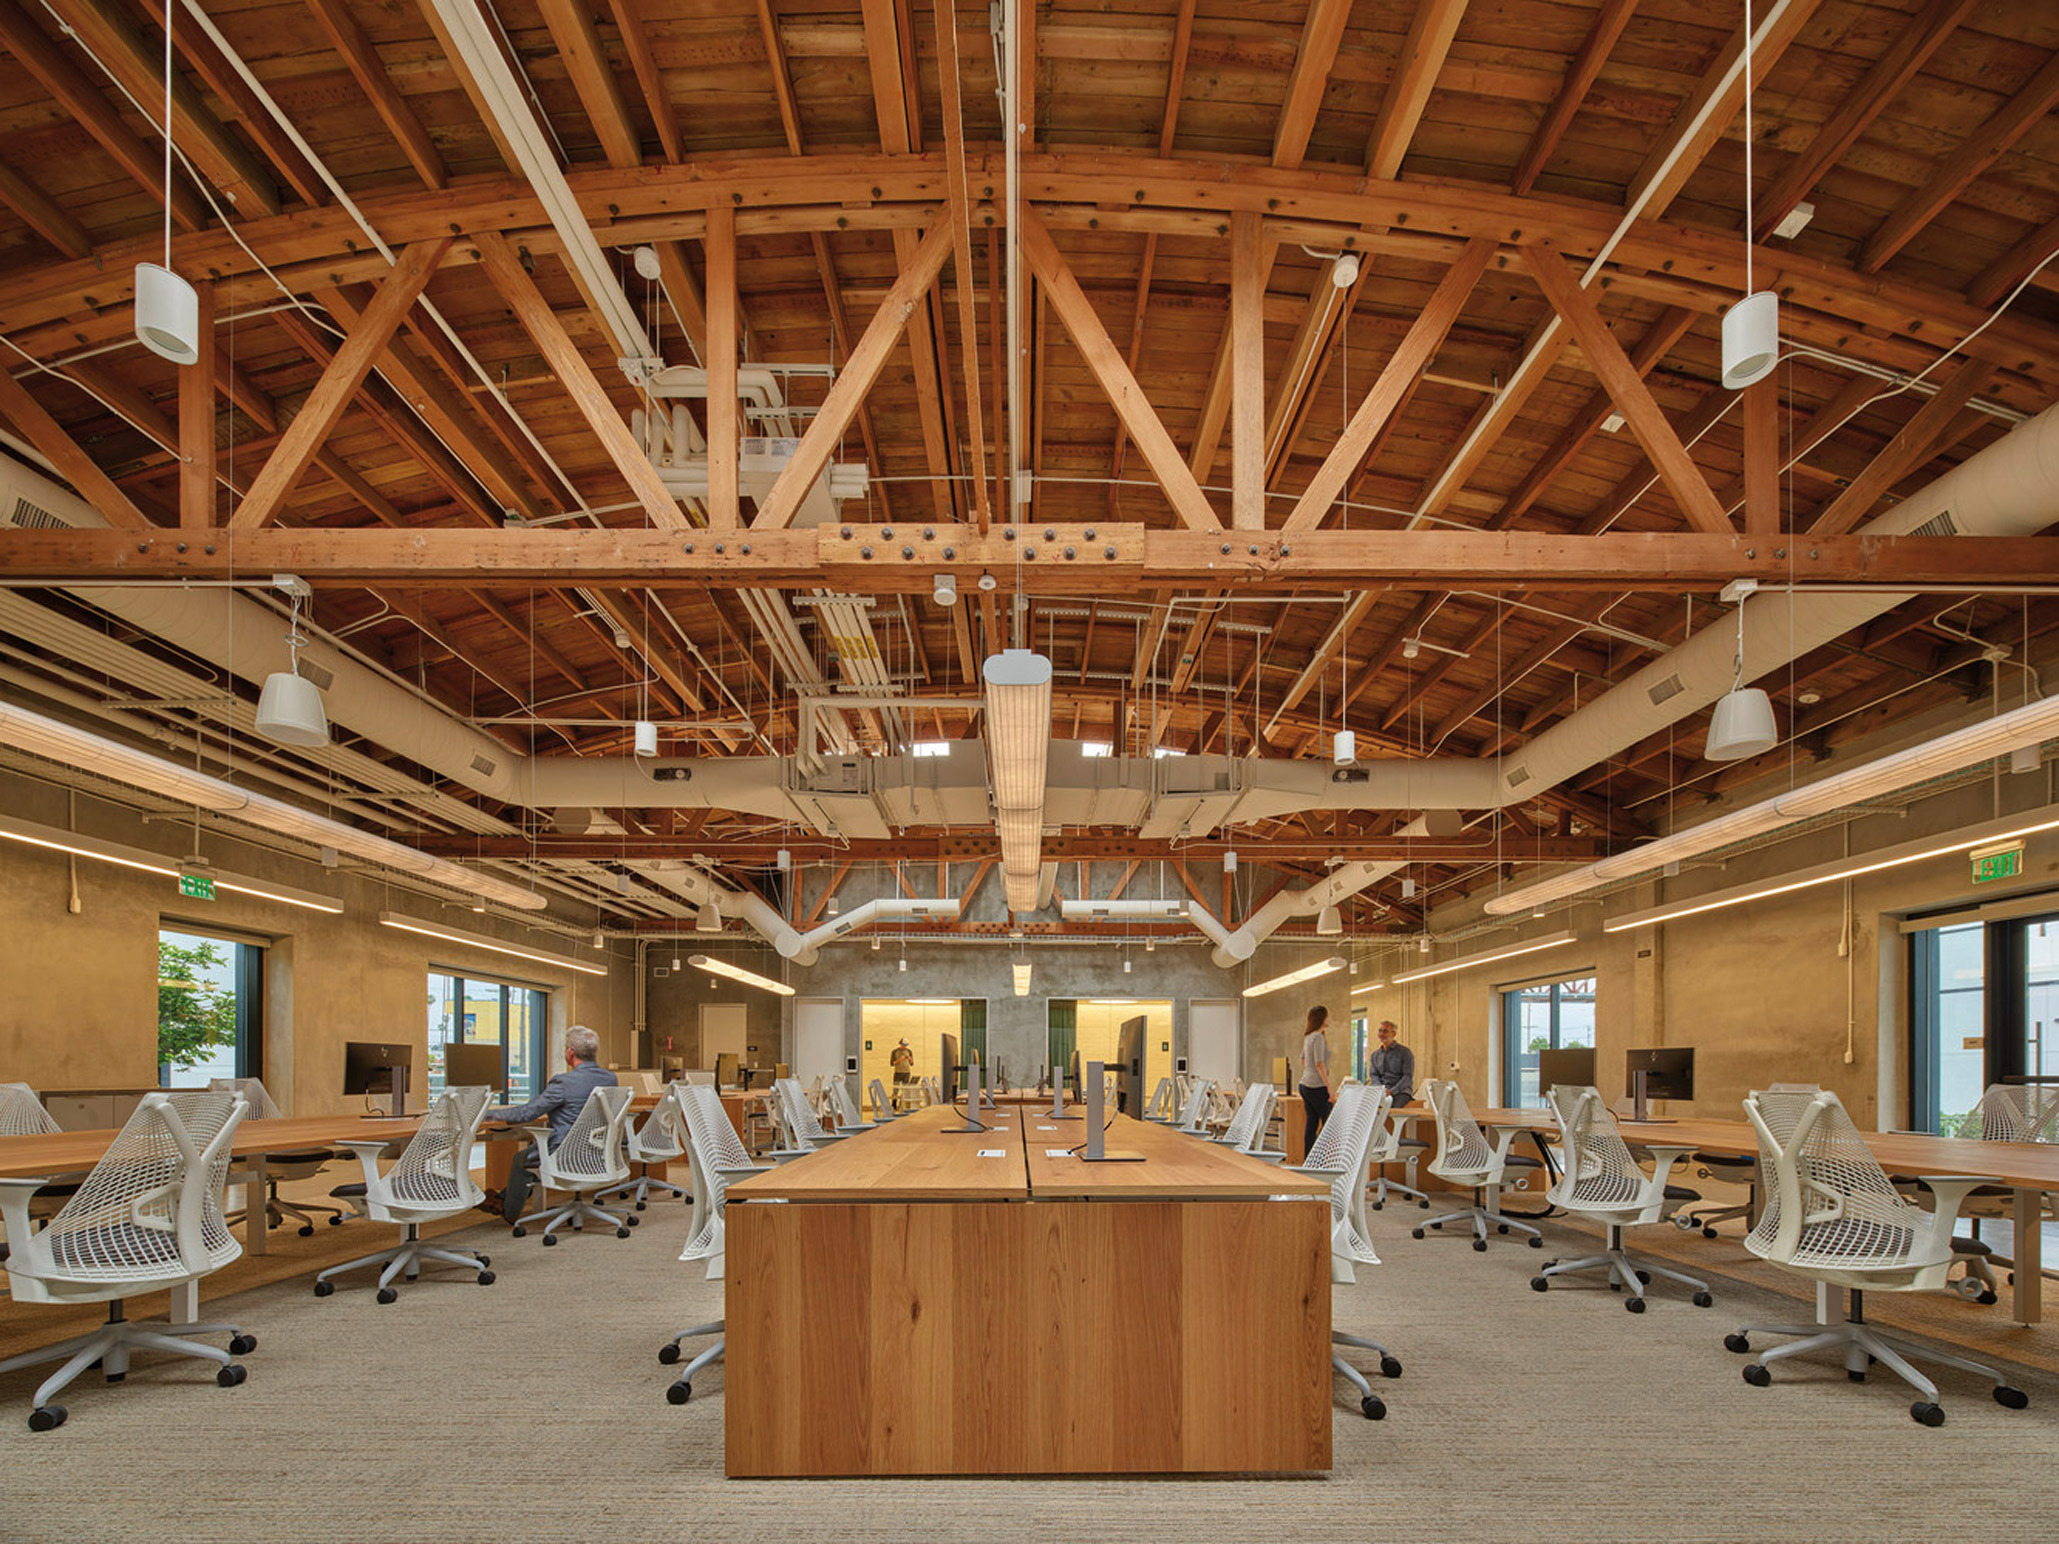 Modern office space featuring exposed wooden truss ceilings and pendant lighting. Central communal workstation surrounded by individual desks, ergonomic chairs, and ample natural light.